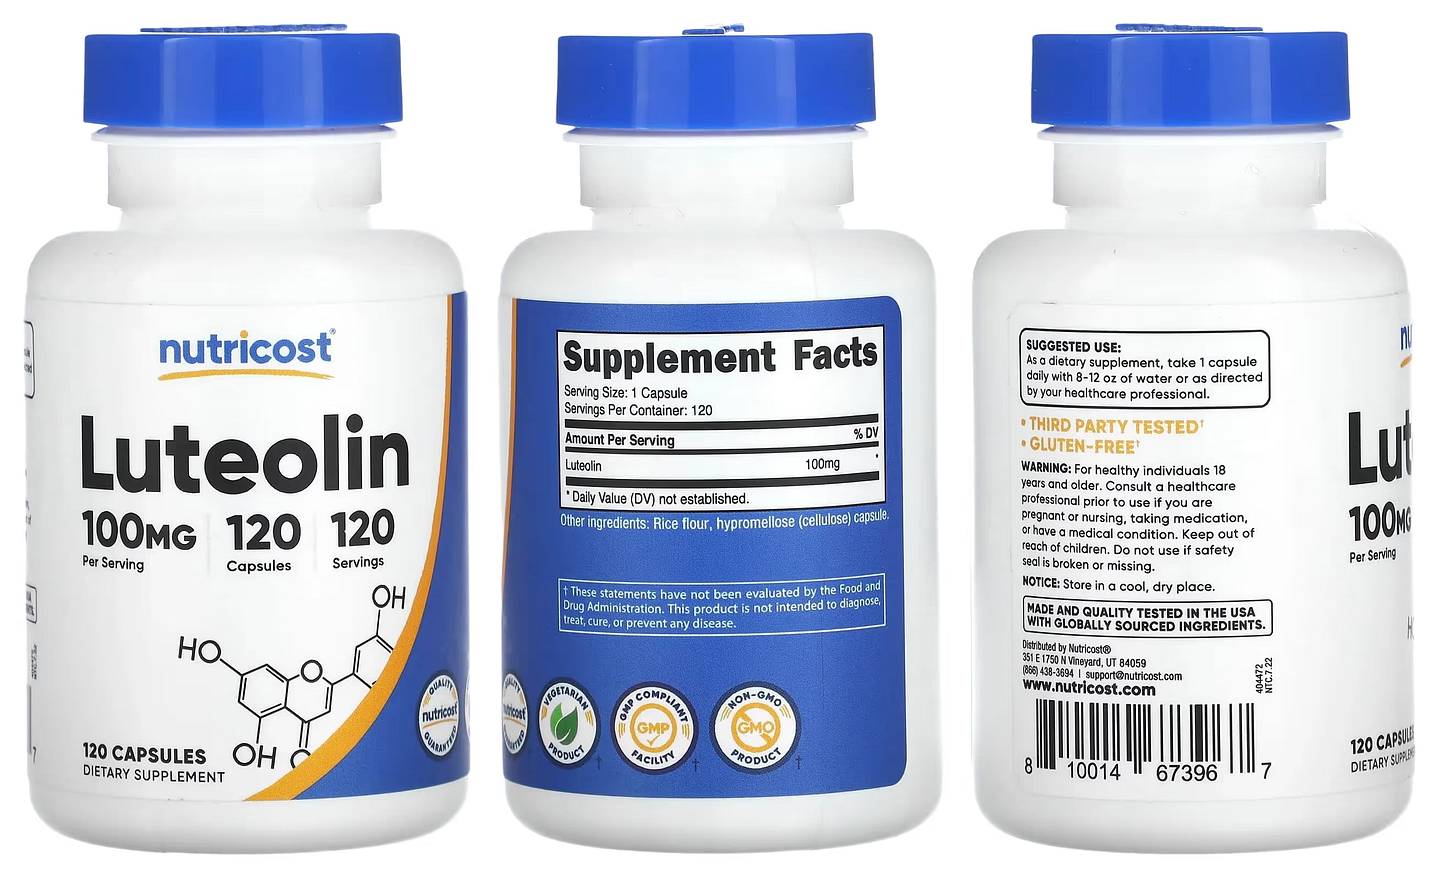 Nutricost, Luteolin packaging